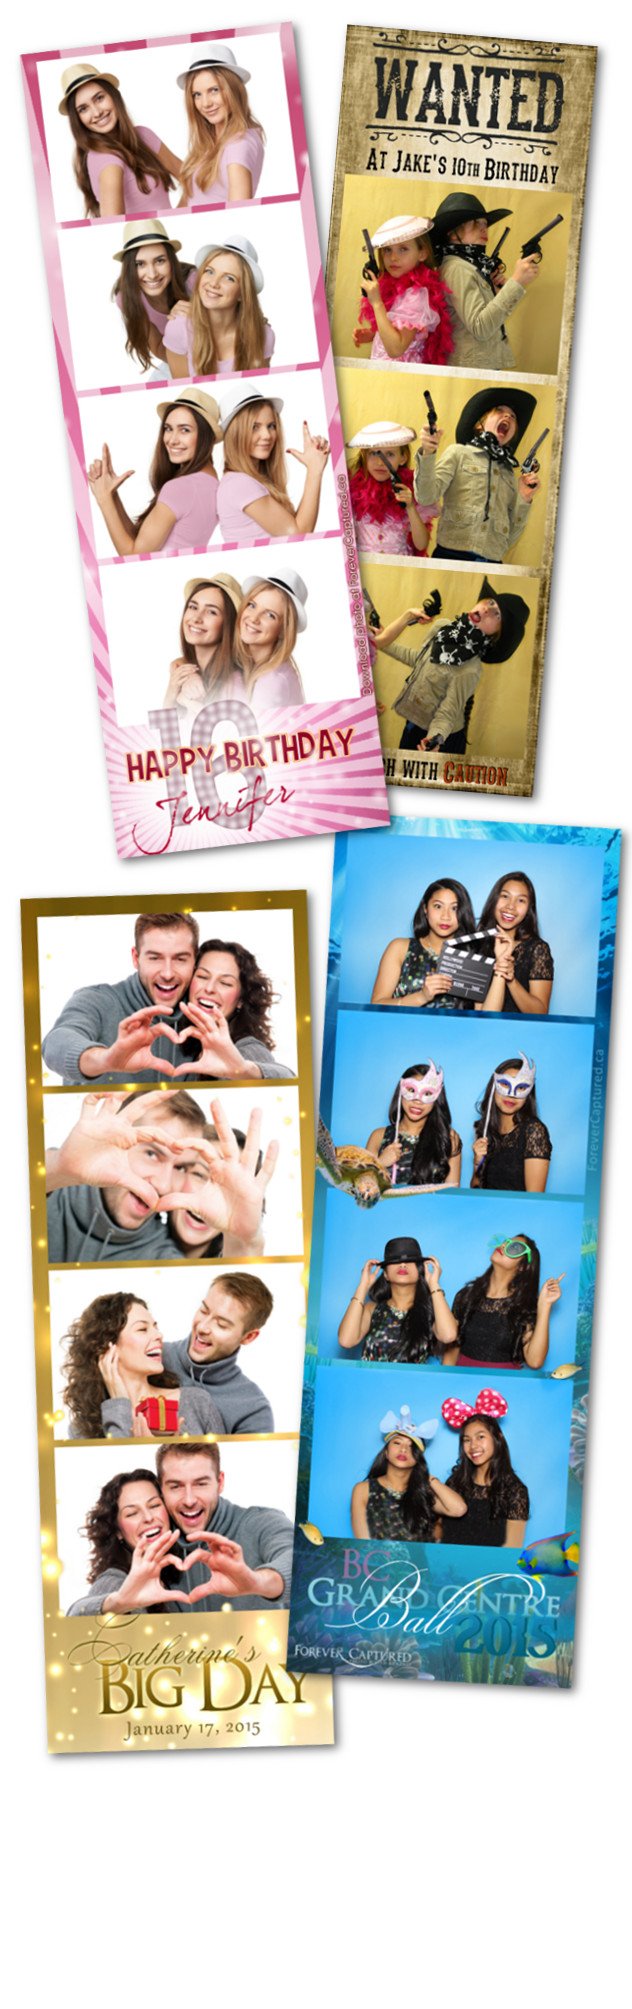 Photobooth rentals for parties, weddings, and events in Langley, BC.